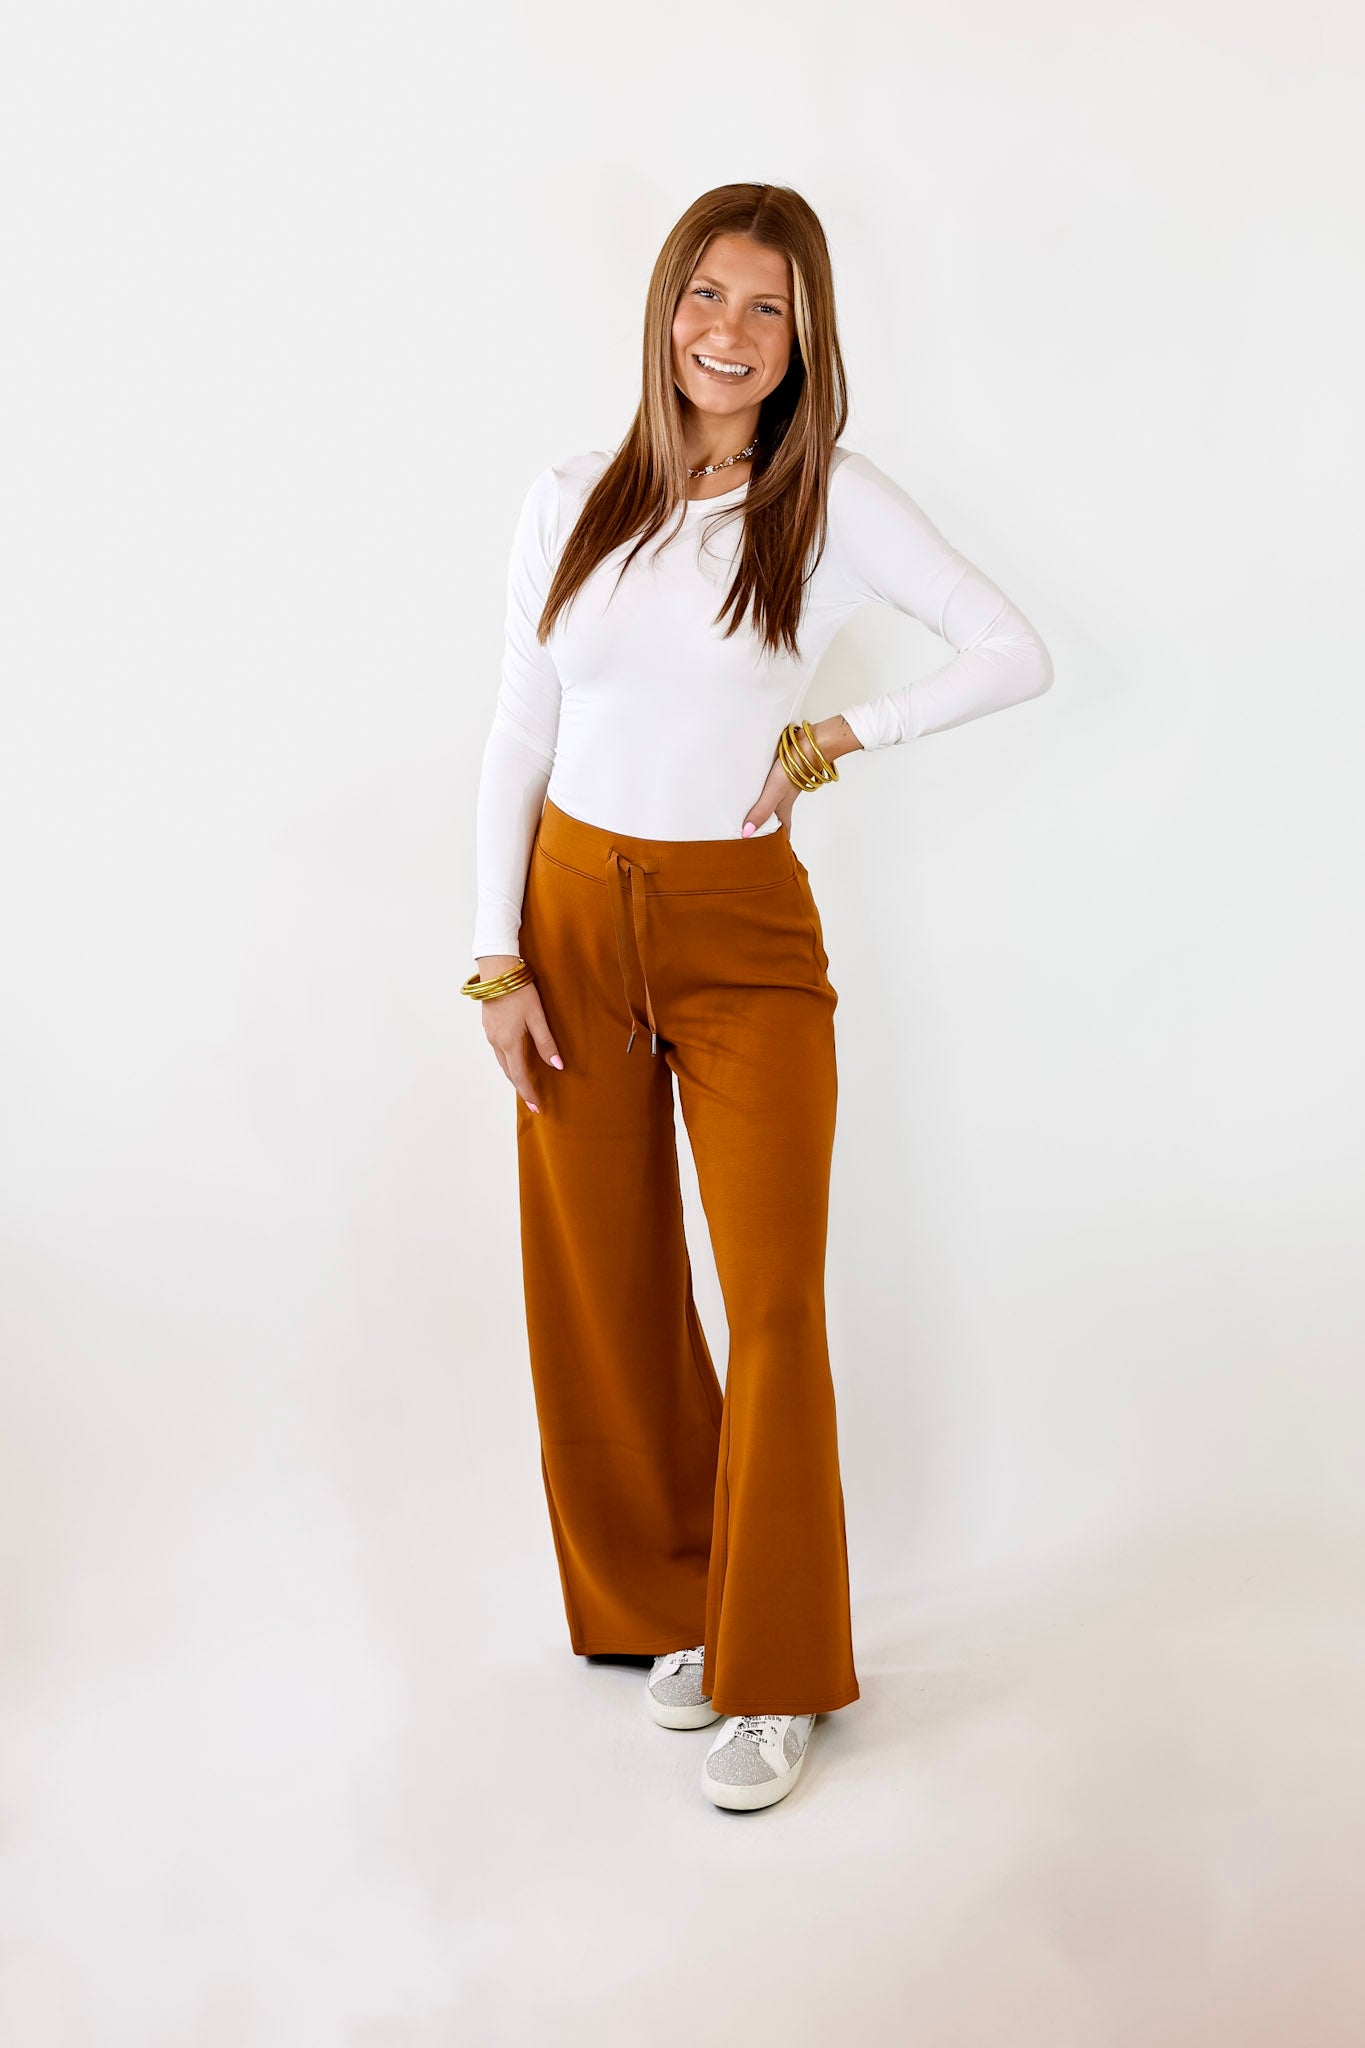 Spanx AirEssentials Wide Leg Pants Are Our New Go-To